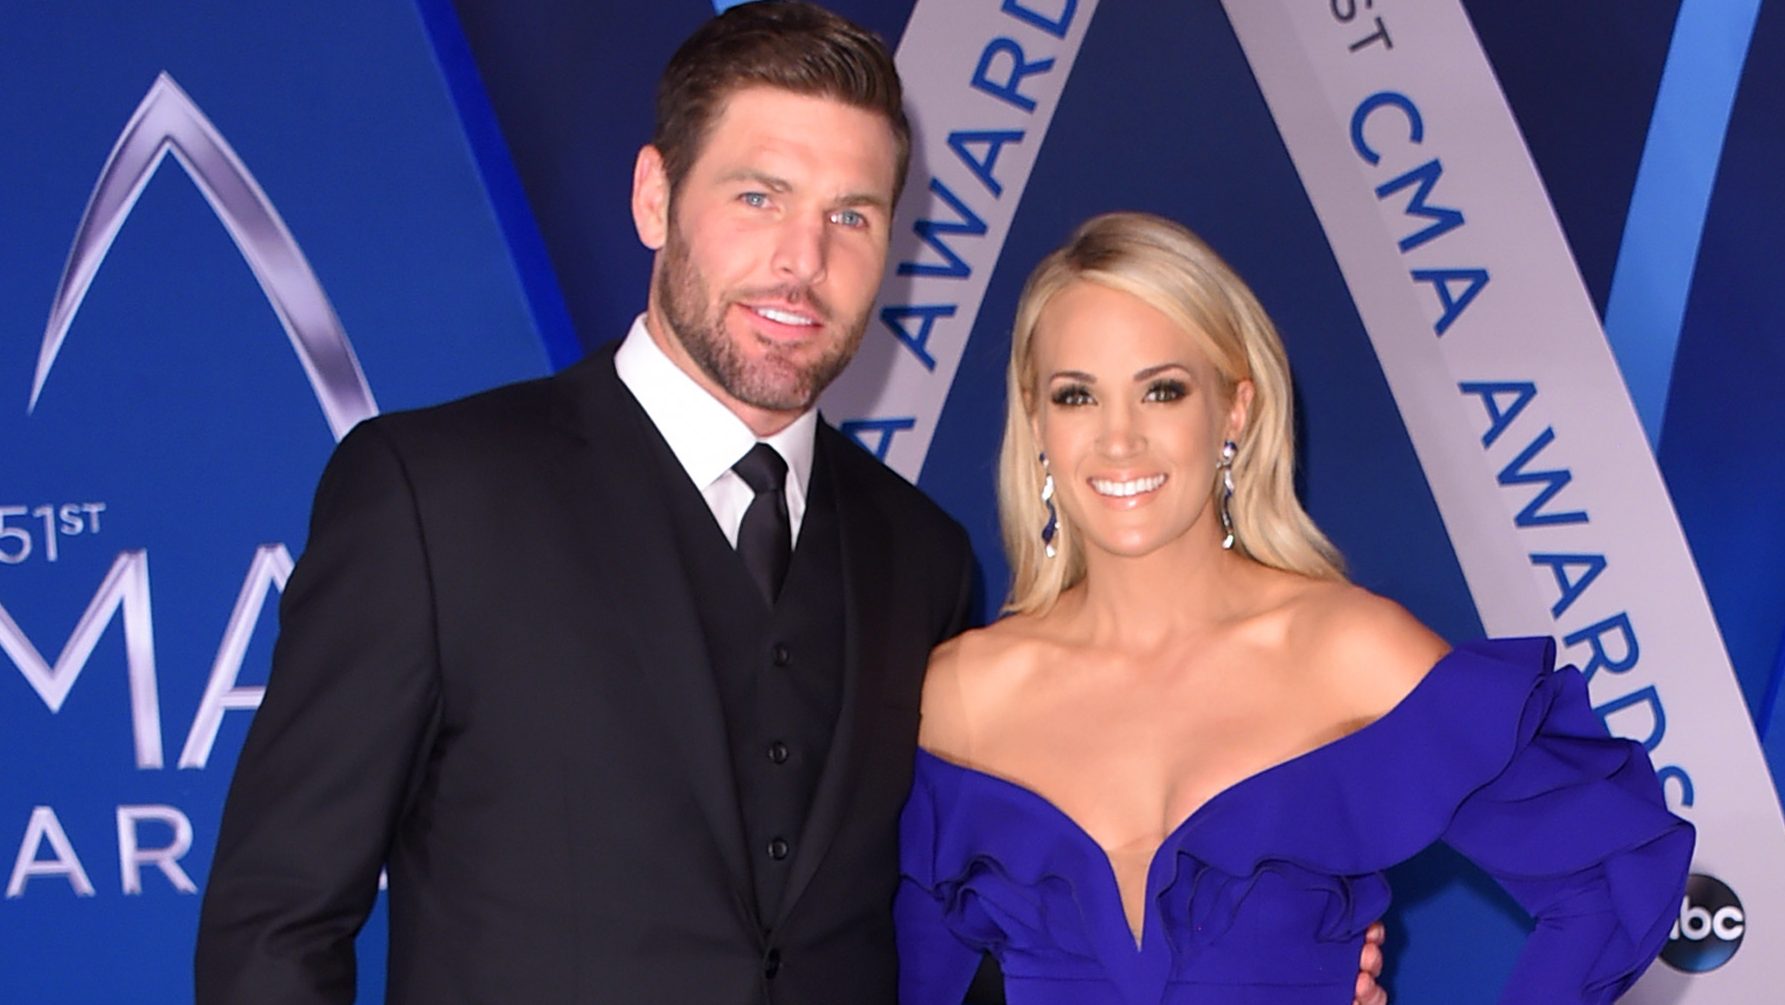 Carrie Underwood’s husband Mike Fisher Gives Glory to God